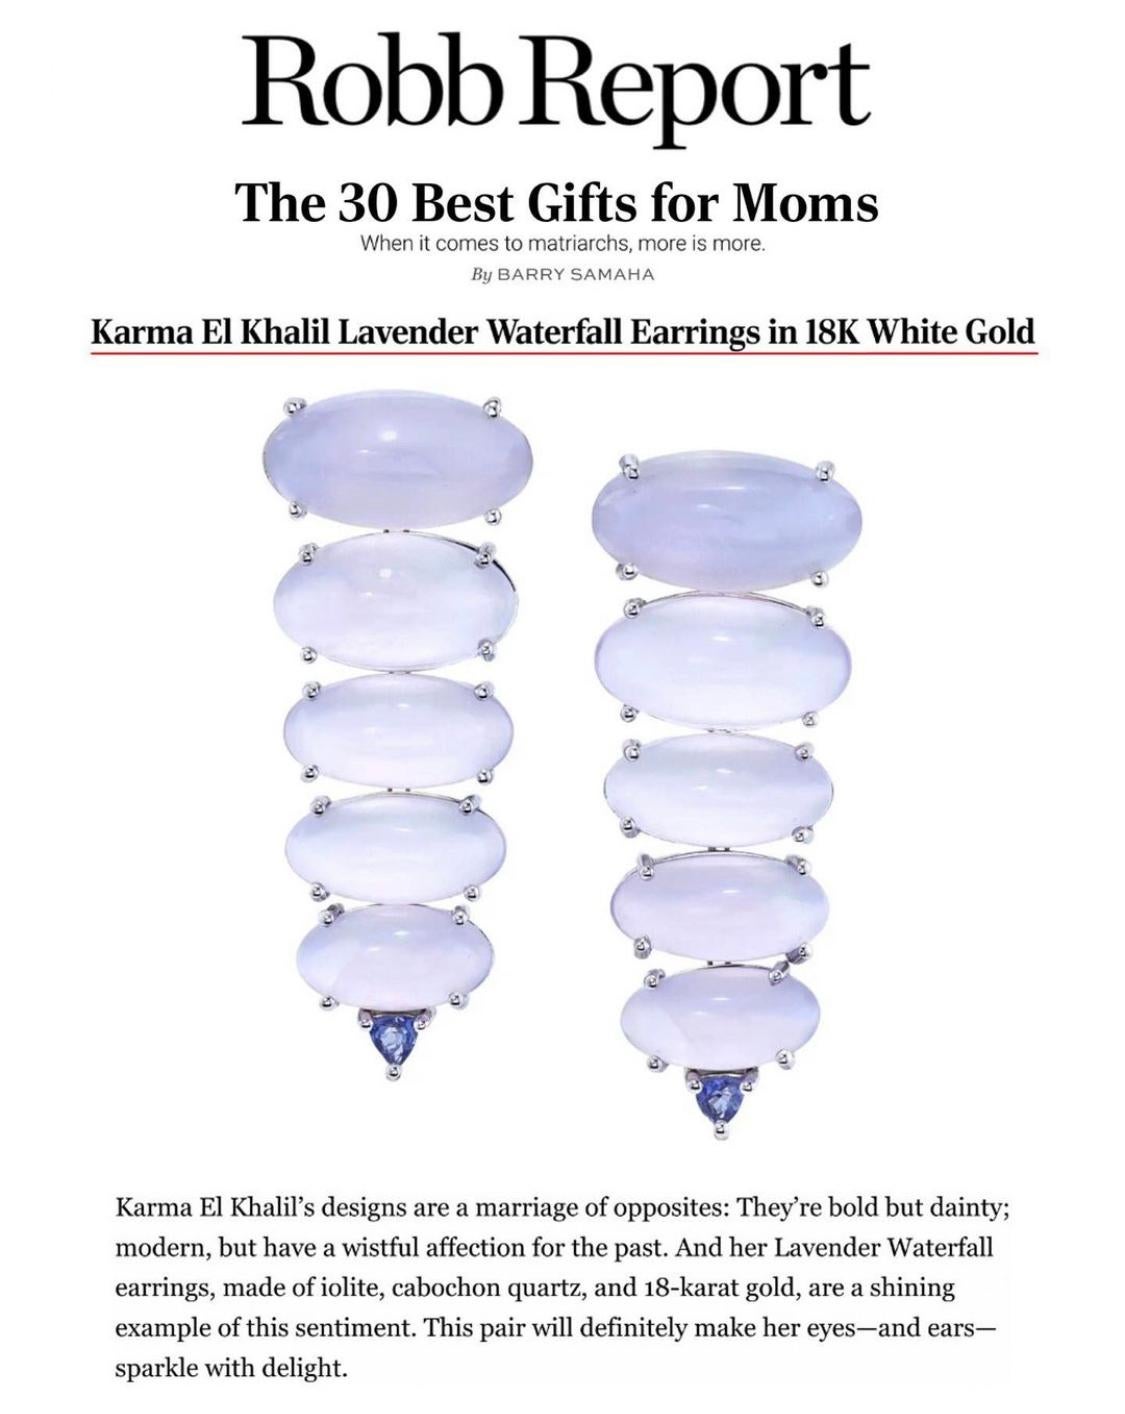 Ethereal Ombre Lavender Waterfall Earrings in 18k white gold, featuring ten graduating custom-cut cabochons of Lavender Quartz. Each earring displays five cabochons of lavender quartz gracefully decending in to a single trillion-cut blue-violet